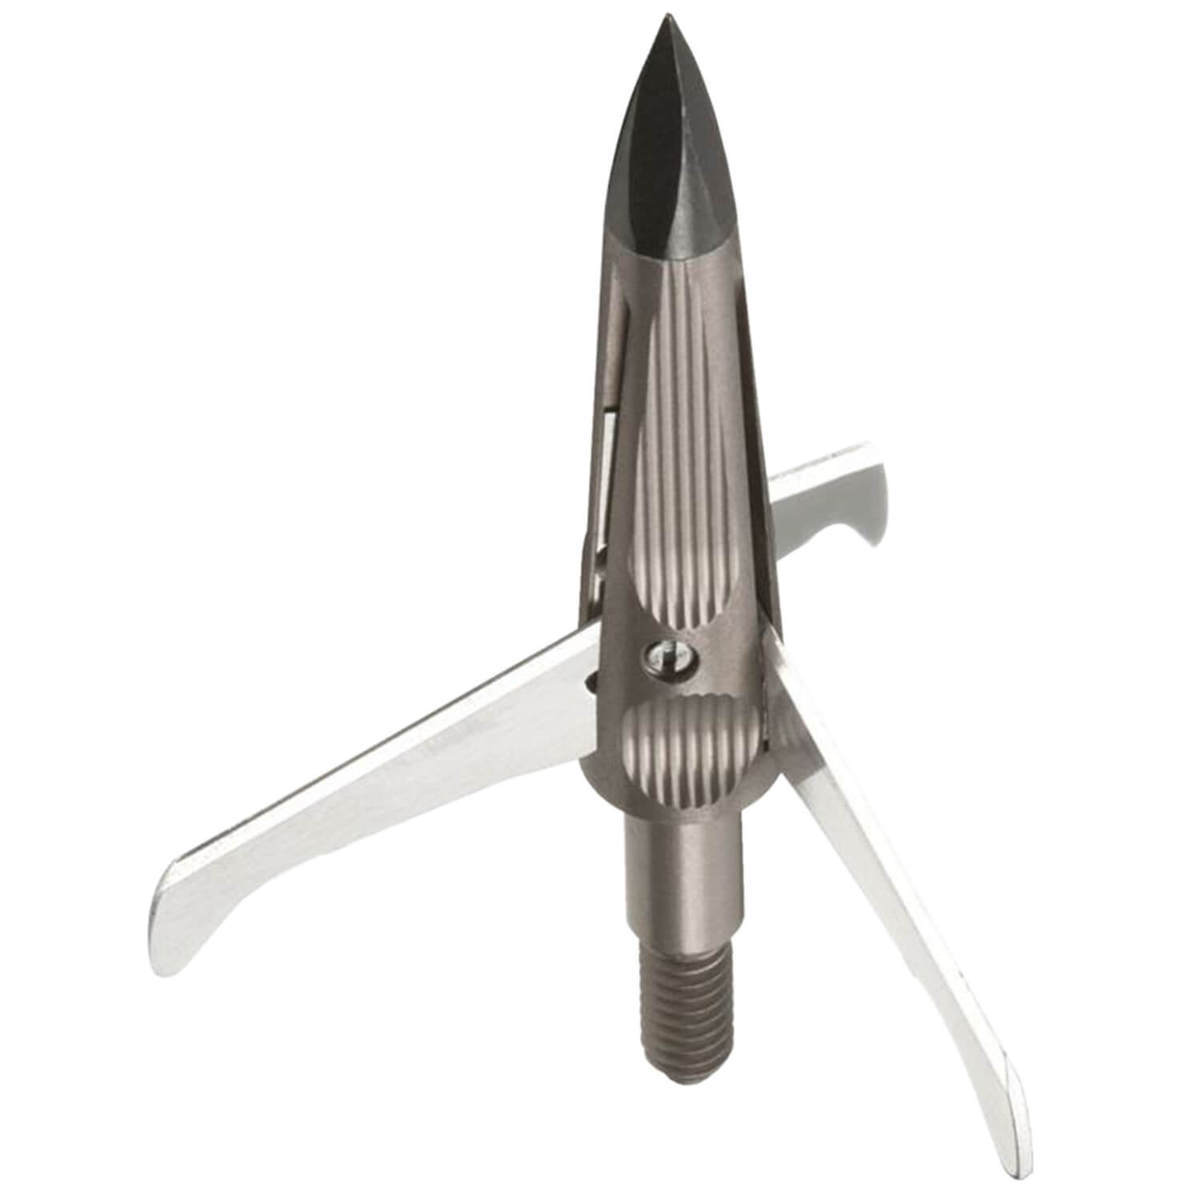 Nap Spitfire Maxx For Crossbow 100gr Trophy Tip Broadhead 3 Pack Sportsmans Warehouse 2288